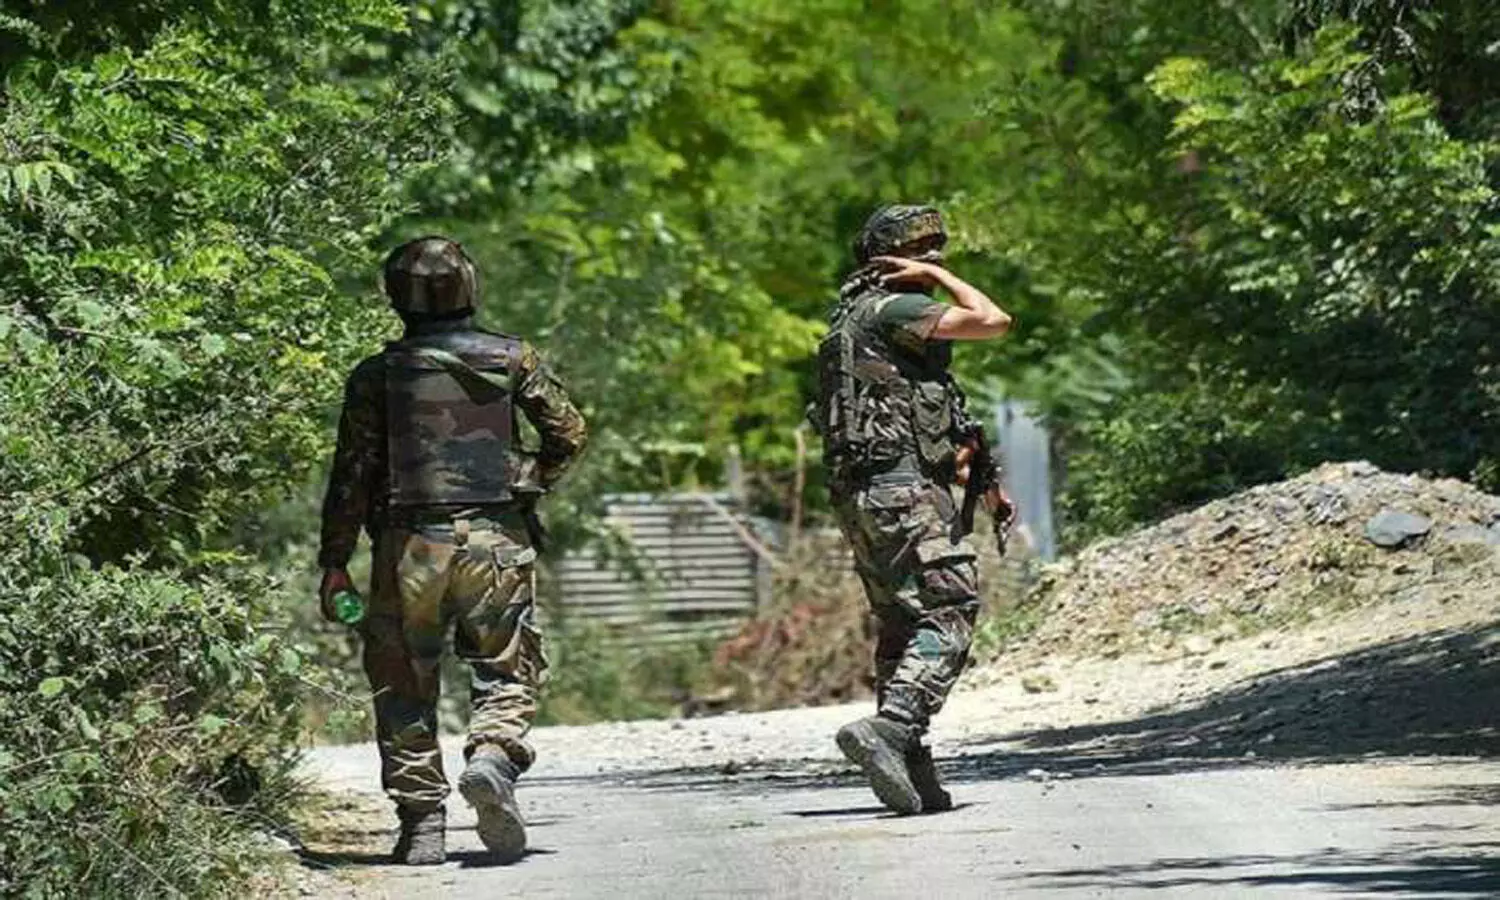 Bank manager shot dead by terrorists in J&K in another attack on civilians